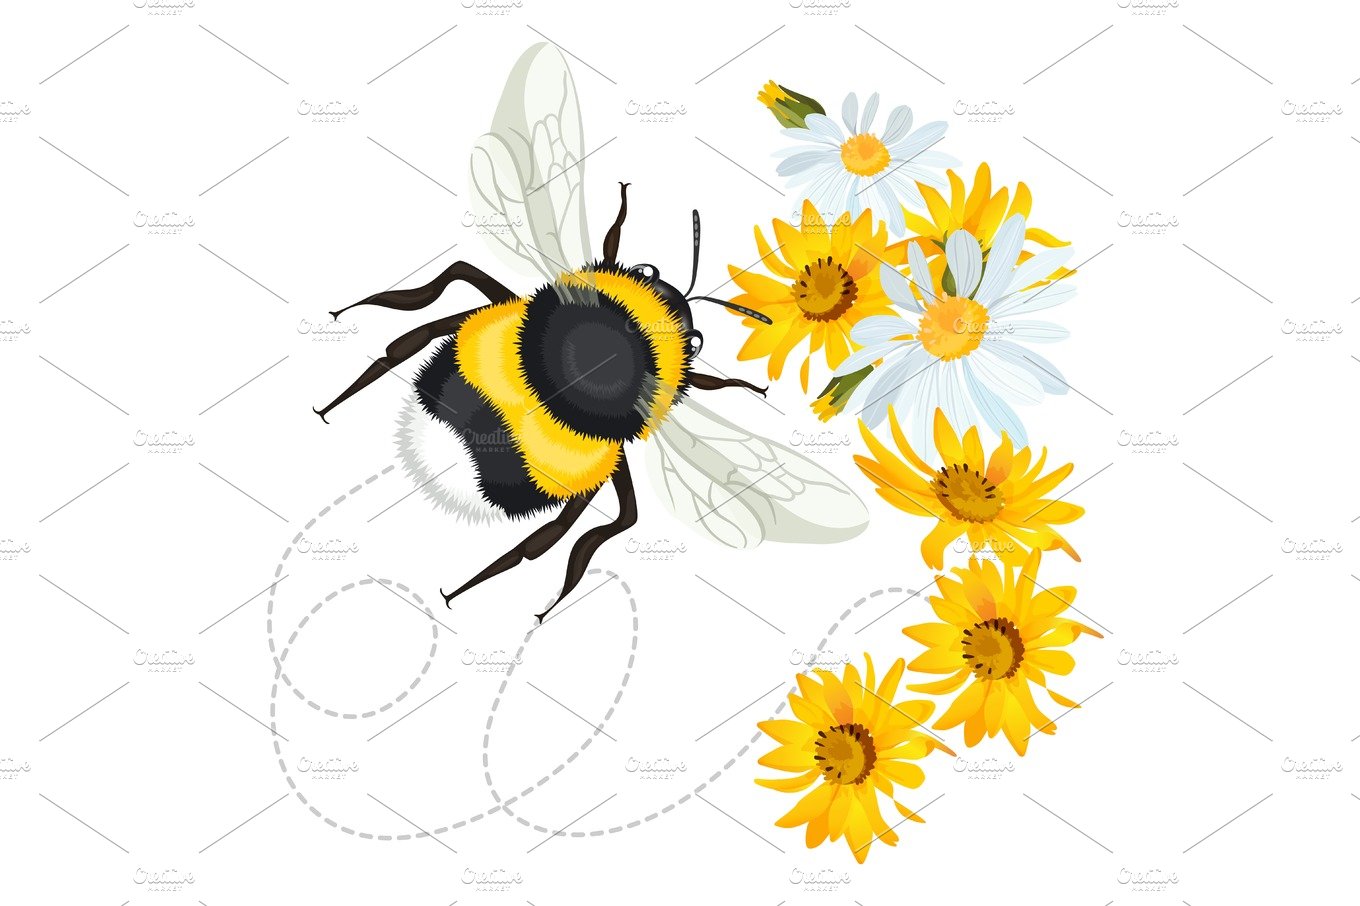 Bumblebee closeup head, trace swirled line on background arnica chamomile cover image.